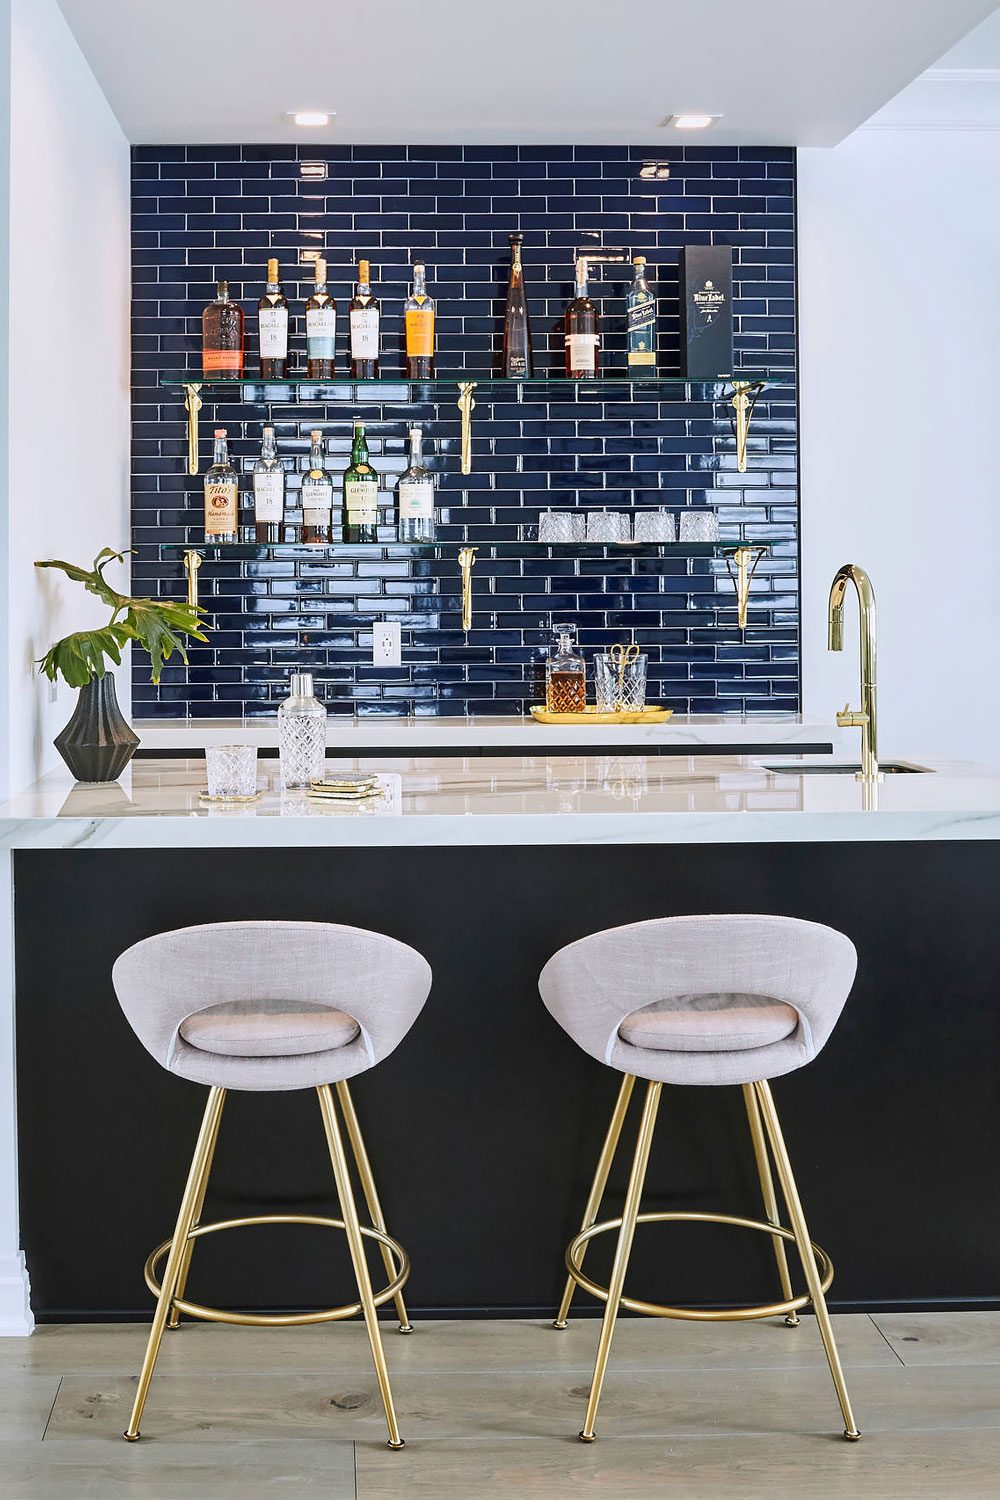 Create Tiles for Attractive Bars